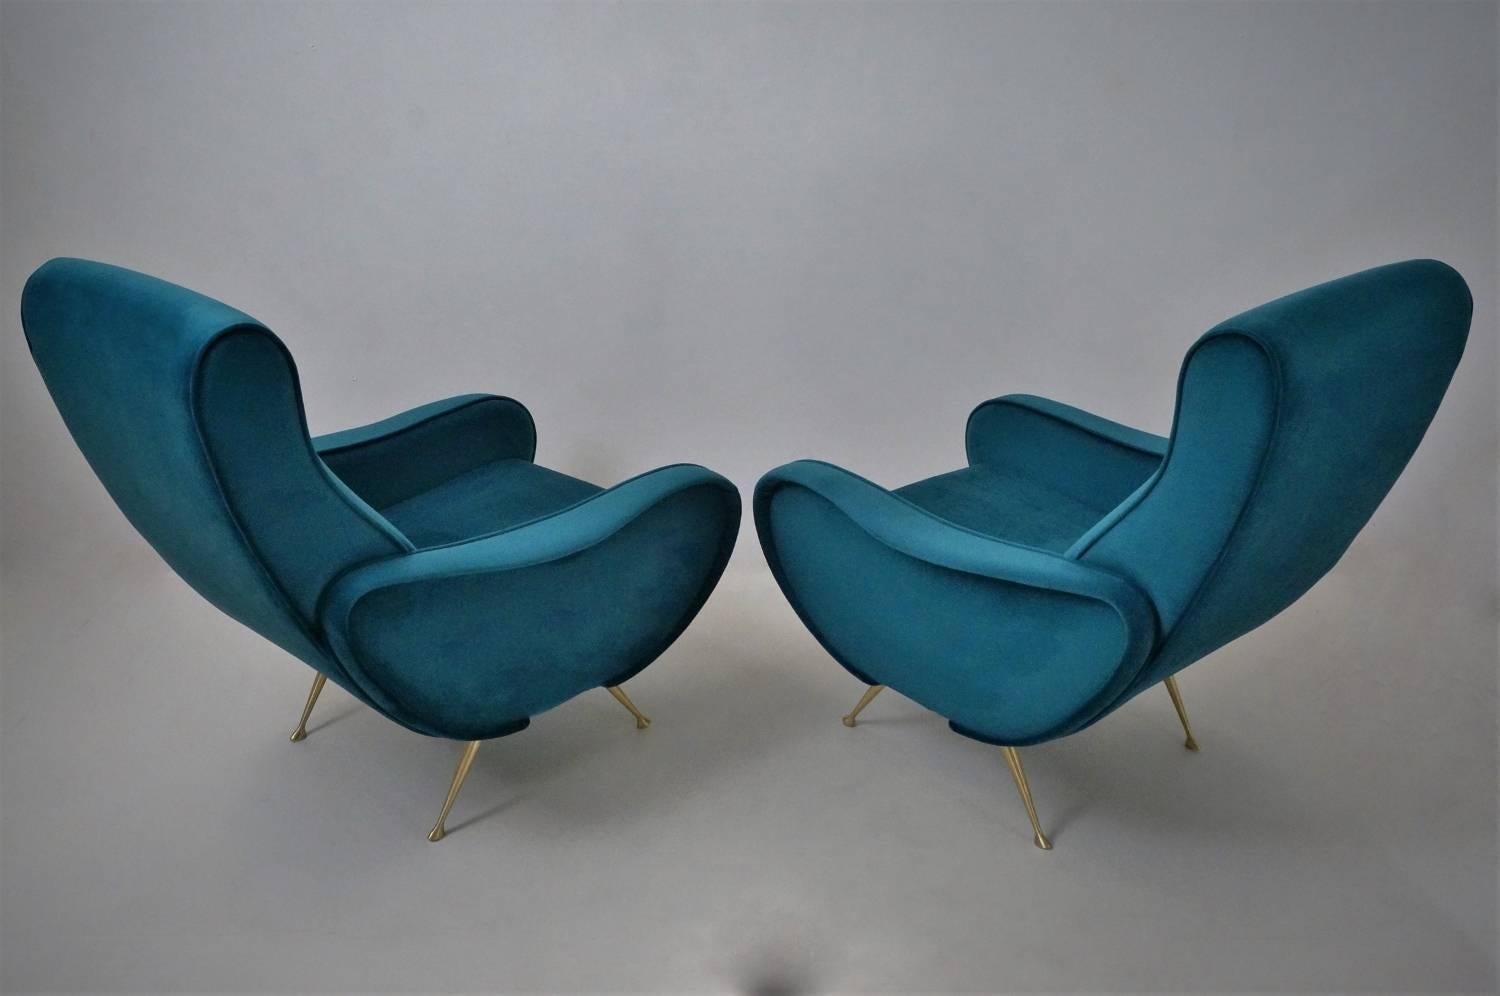 1950s Style Armchair Newly Made to Order in 25 Colors,  Italian For Sale 10